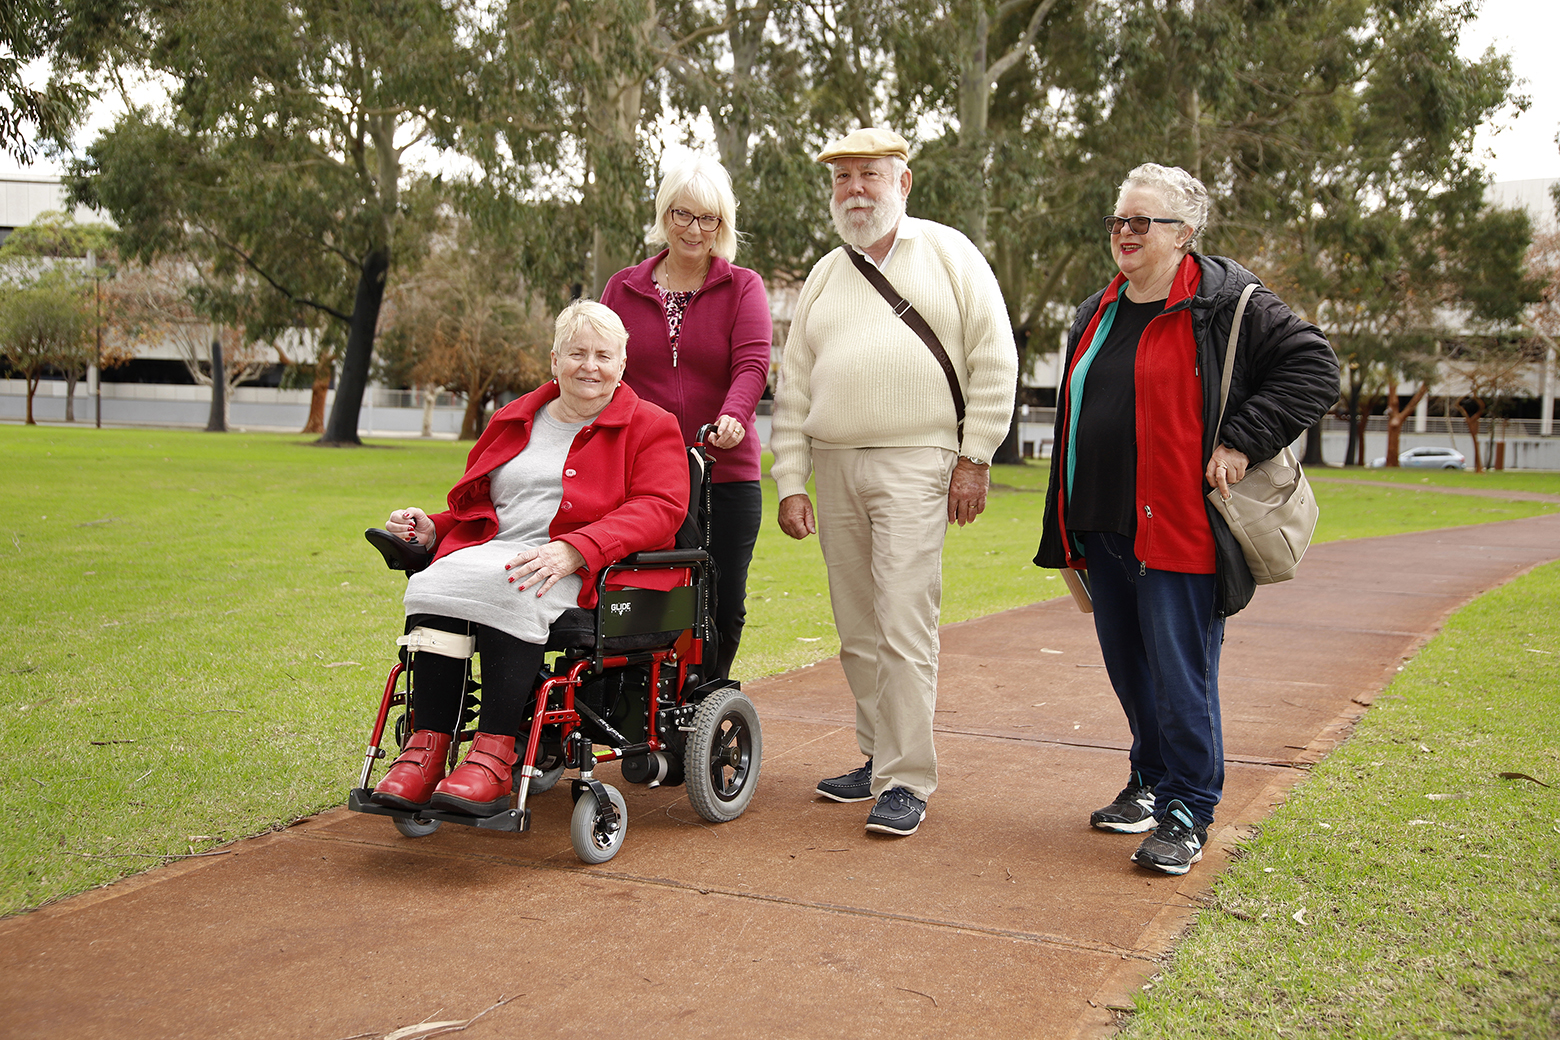 One woman in wheel chair with two older women and one older man standing in a park